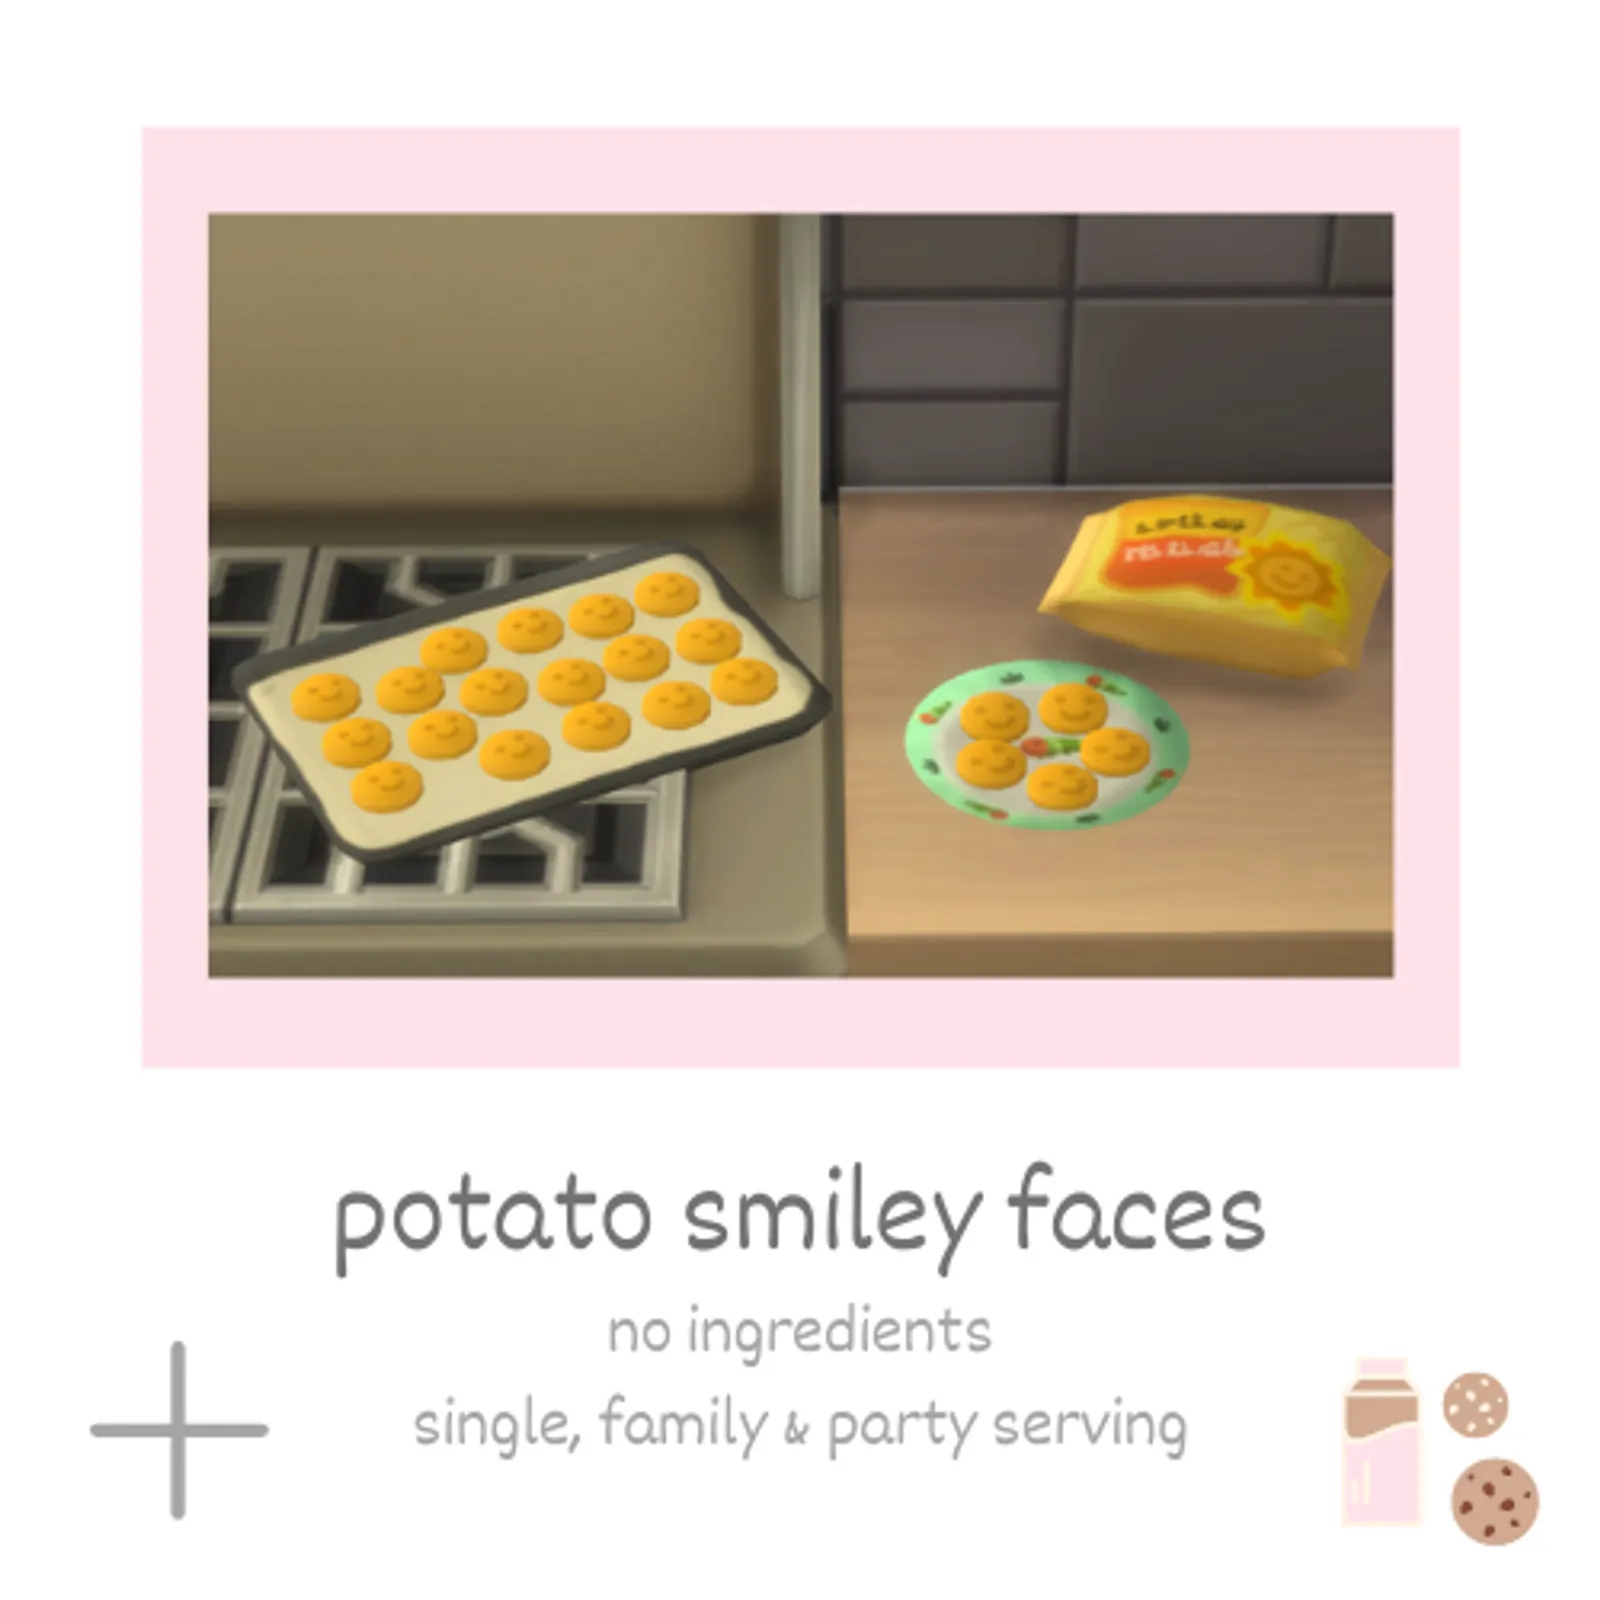 potato smiley faces - updated 31.01